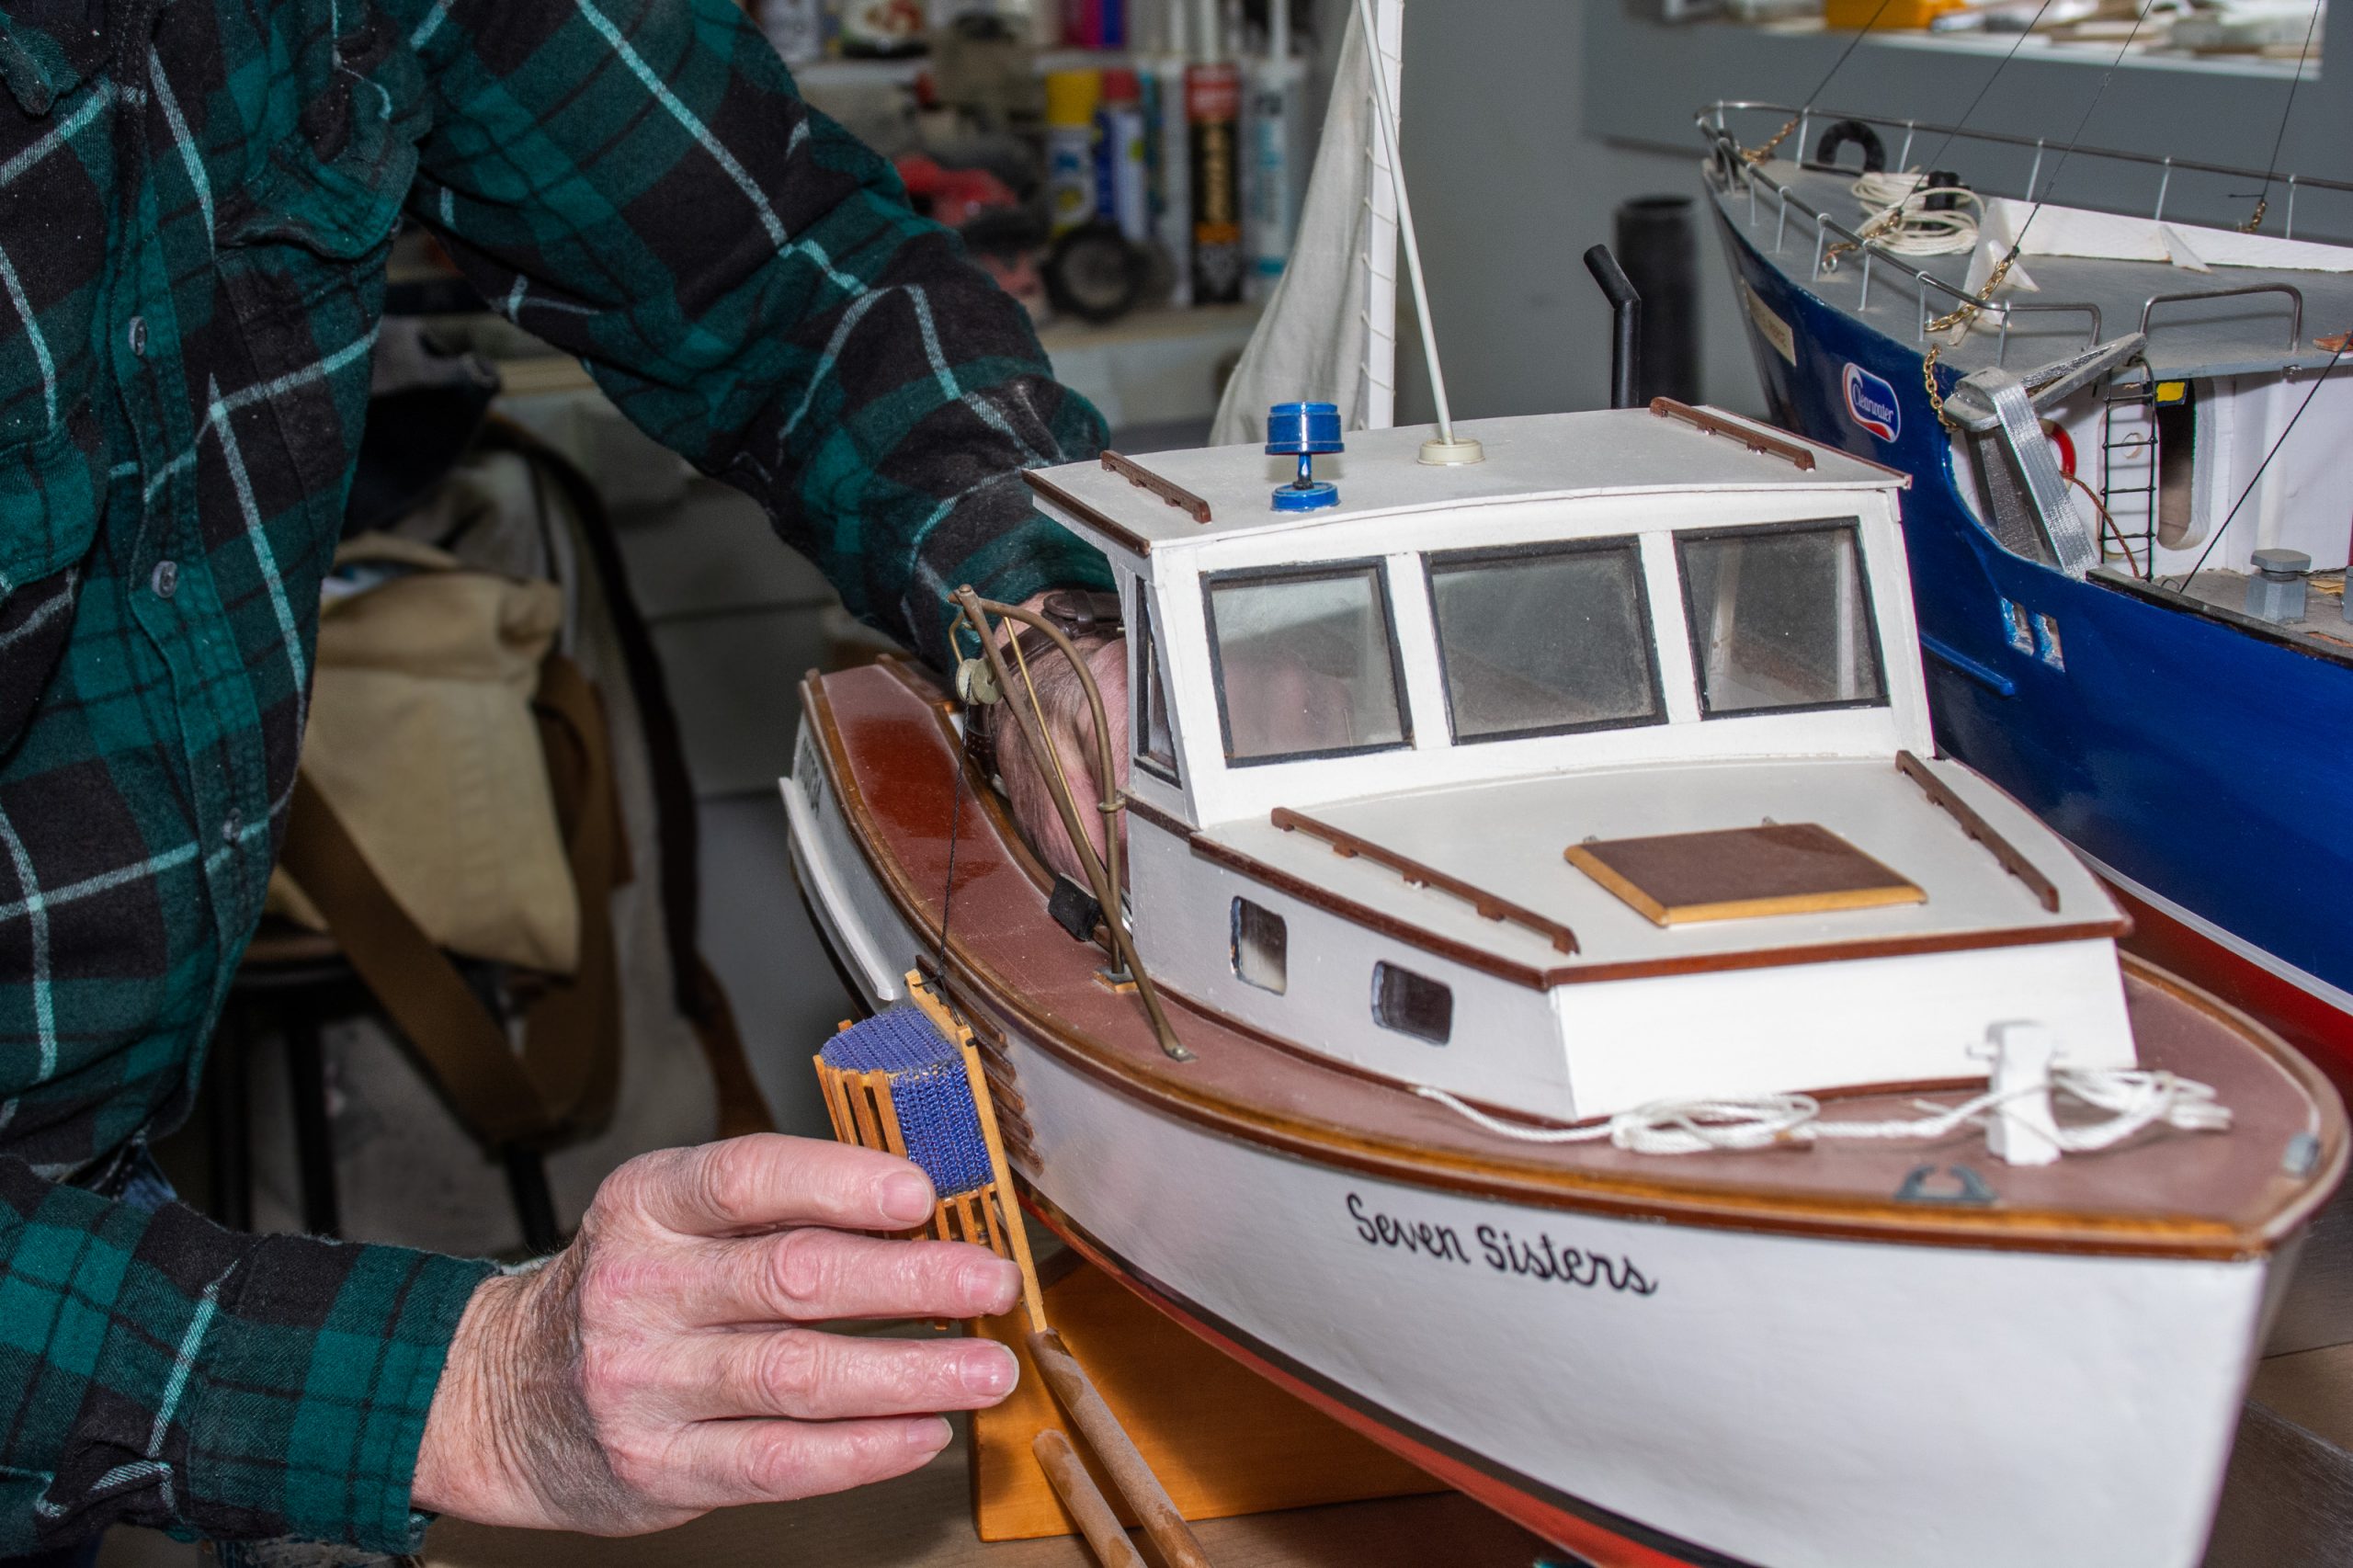 The Seven Sisters was made for Kevin's father who gave it to his wife. Both passed away and the boat returned to Kevin who gave to one of his granddaughters.